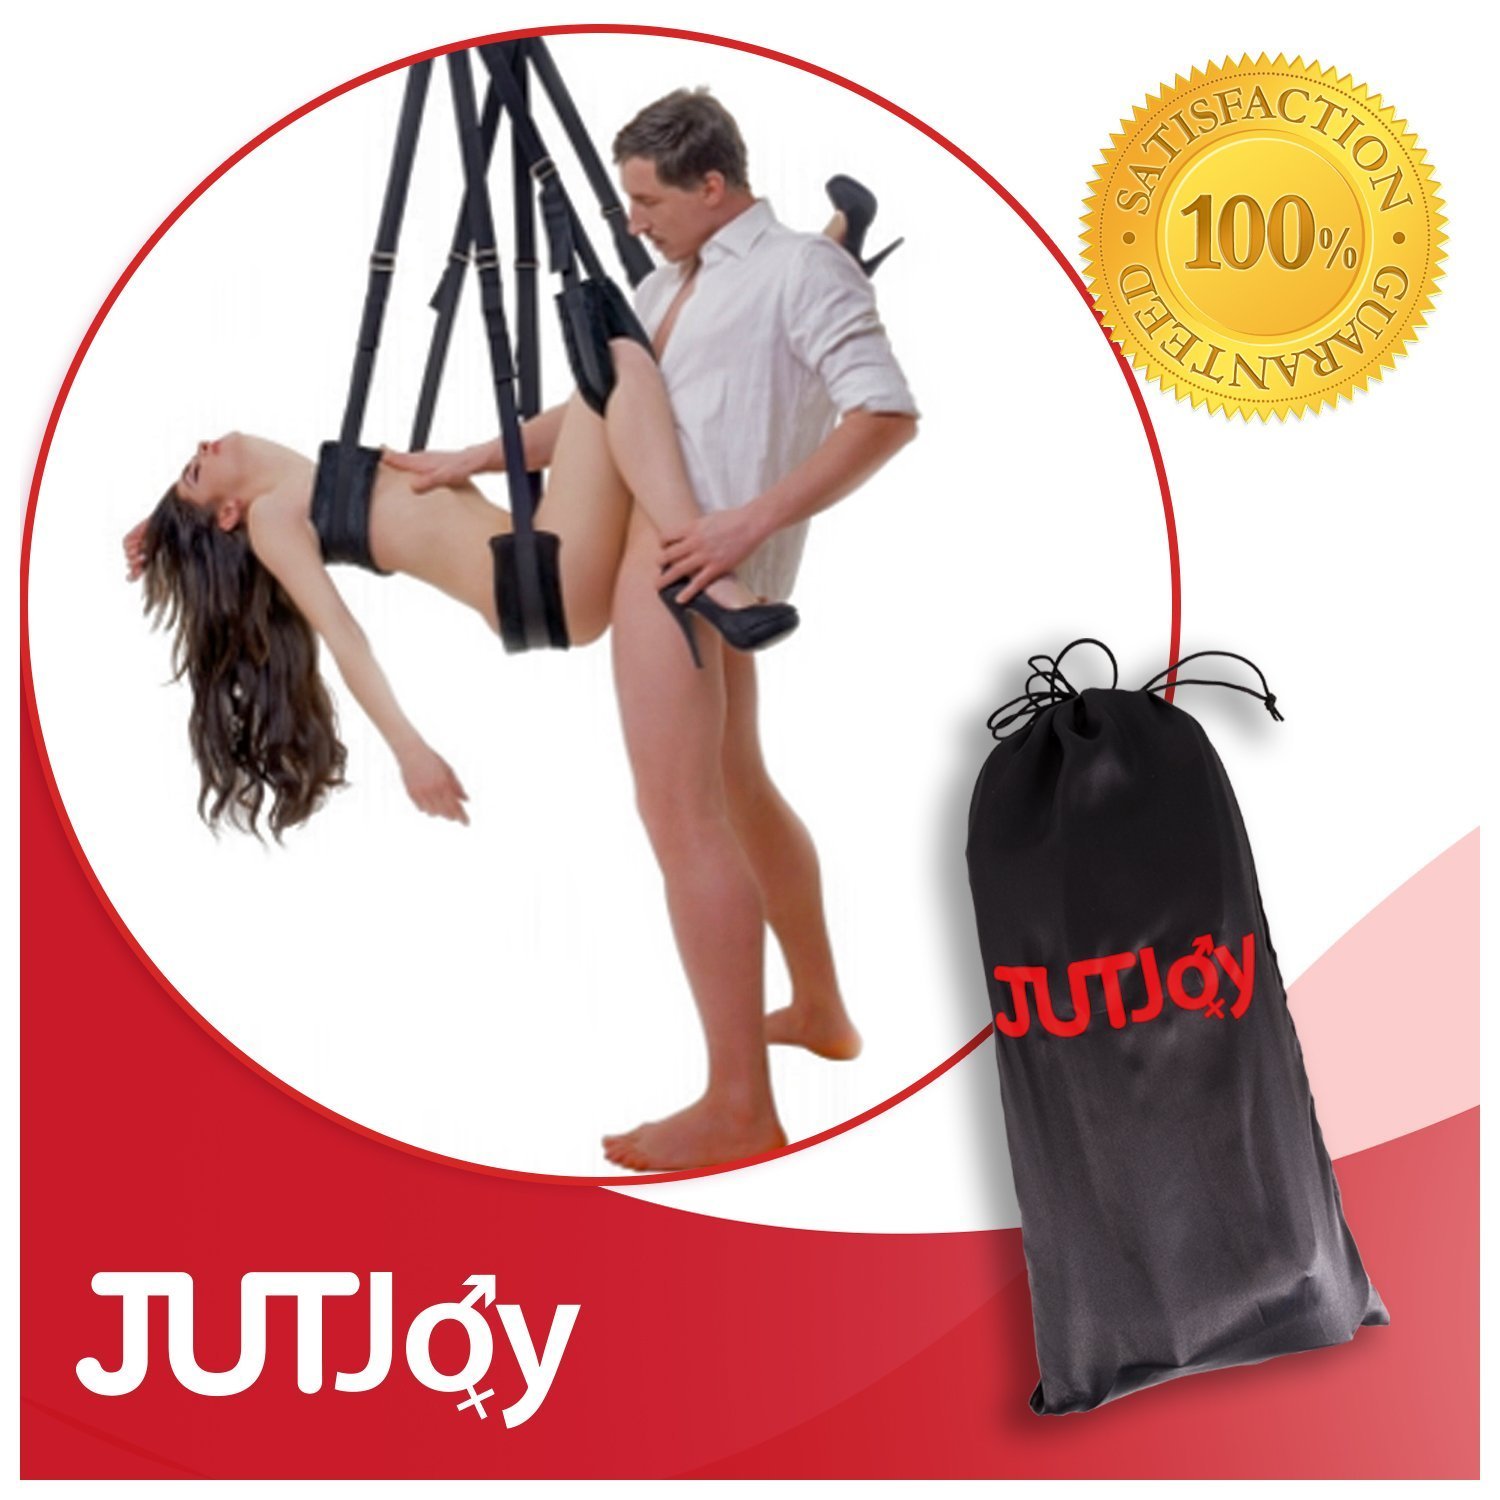 JUTJOY Adult Indoor Sex Swing for Couples Enjoy more intimate ...